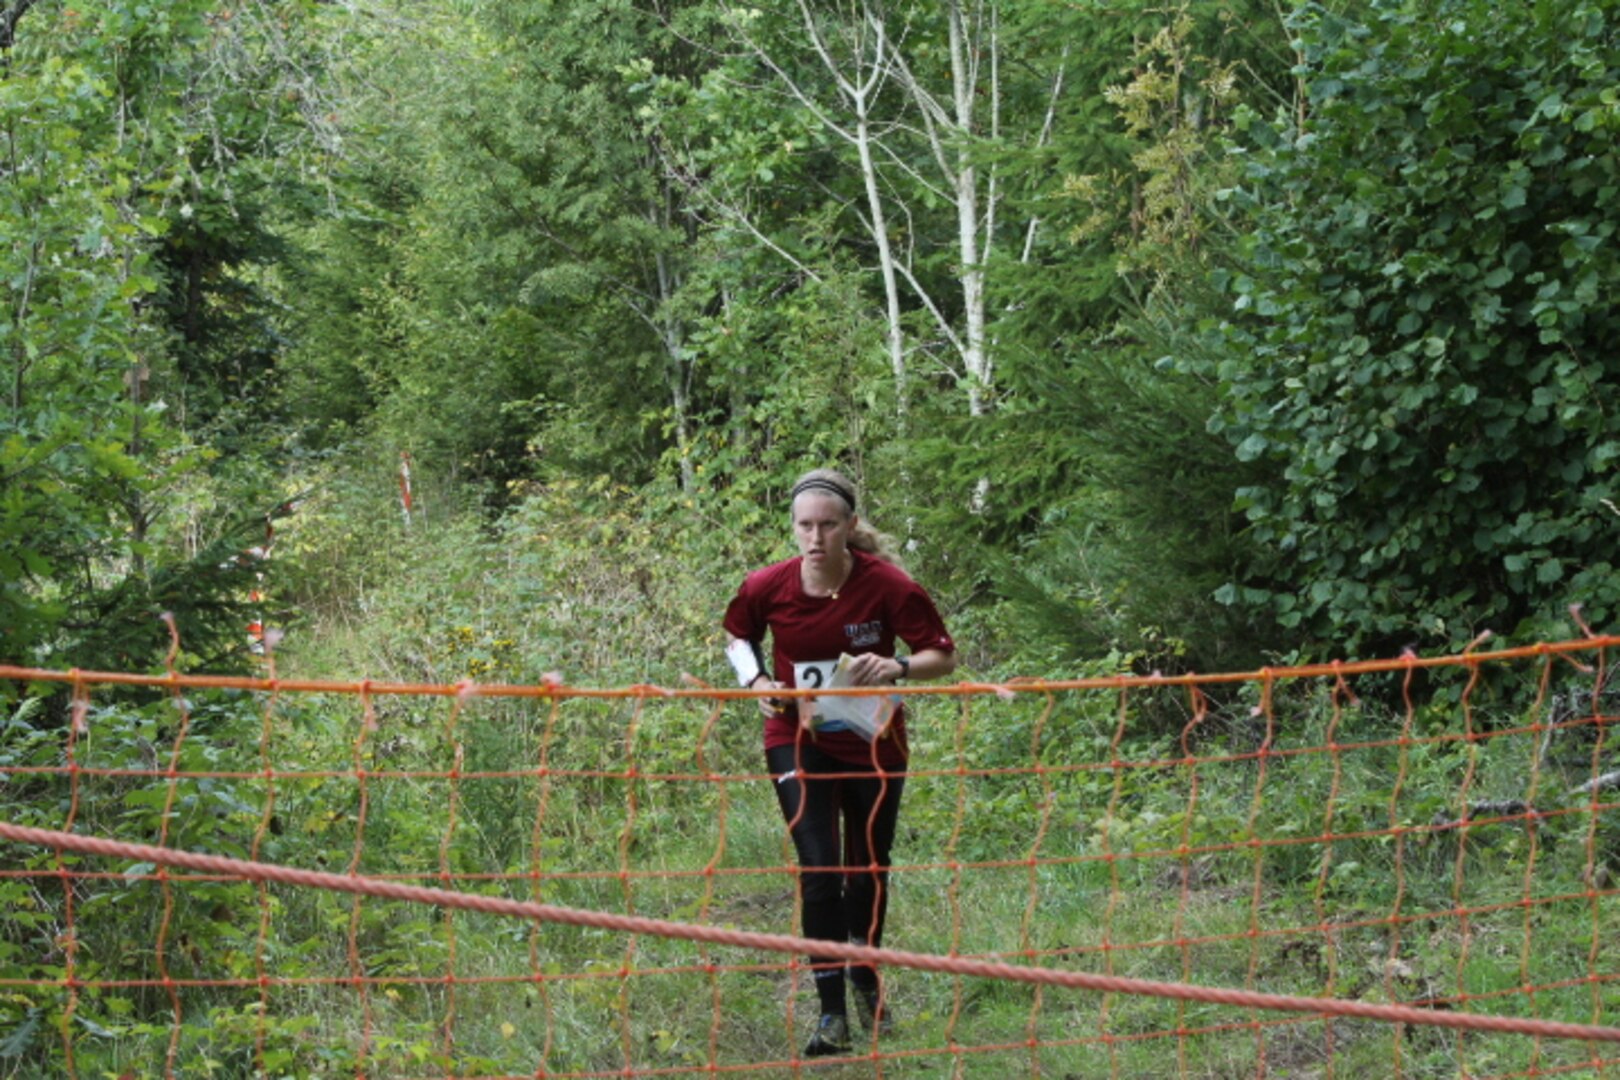 LT Virginia Debons (Navy) at the 2013 CISM World Orienteering Military Championship hosted by the Swedish Armed Forces in Eksjo, Sweden from 26 August to 1 September.